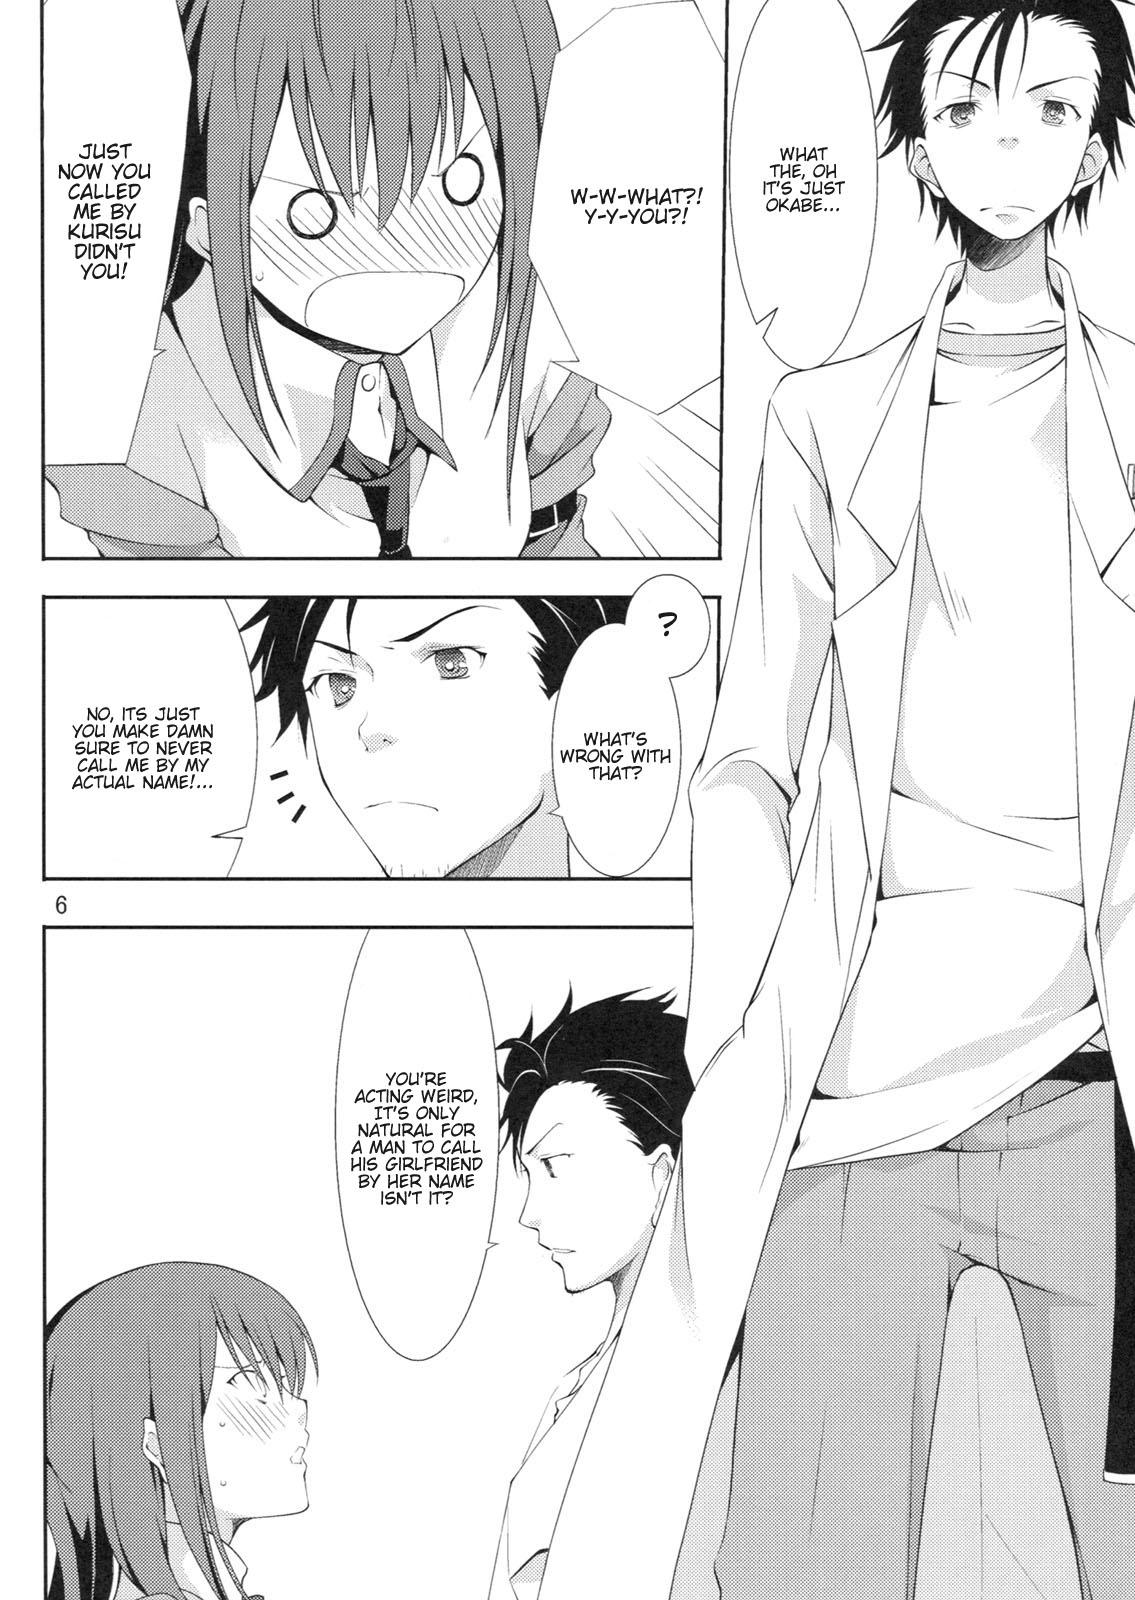 Perfect Embrace - Steinsgate Stretch - Page 6